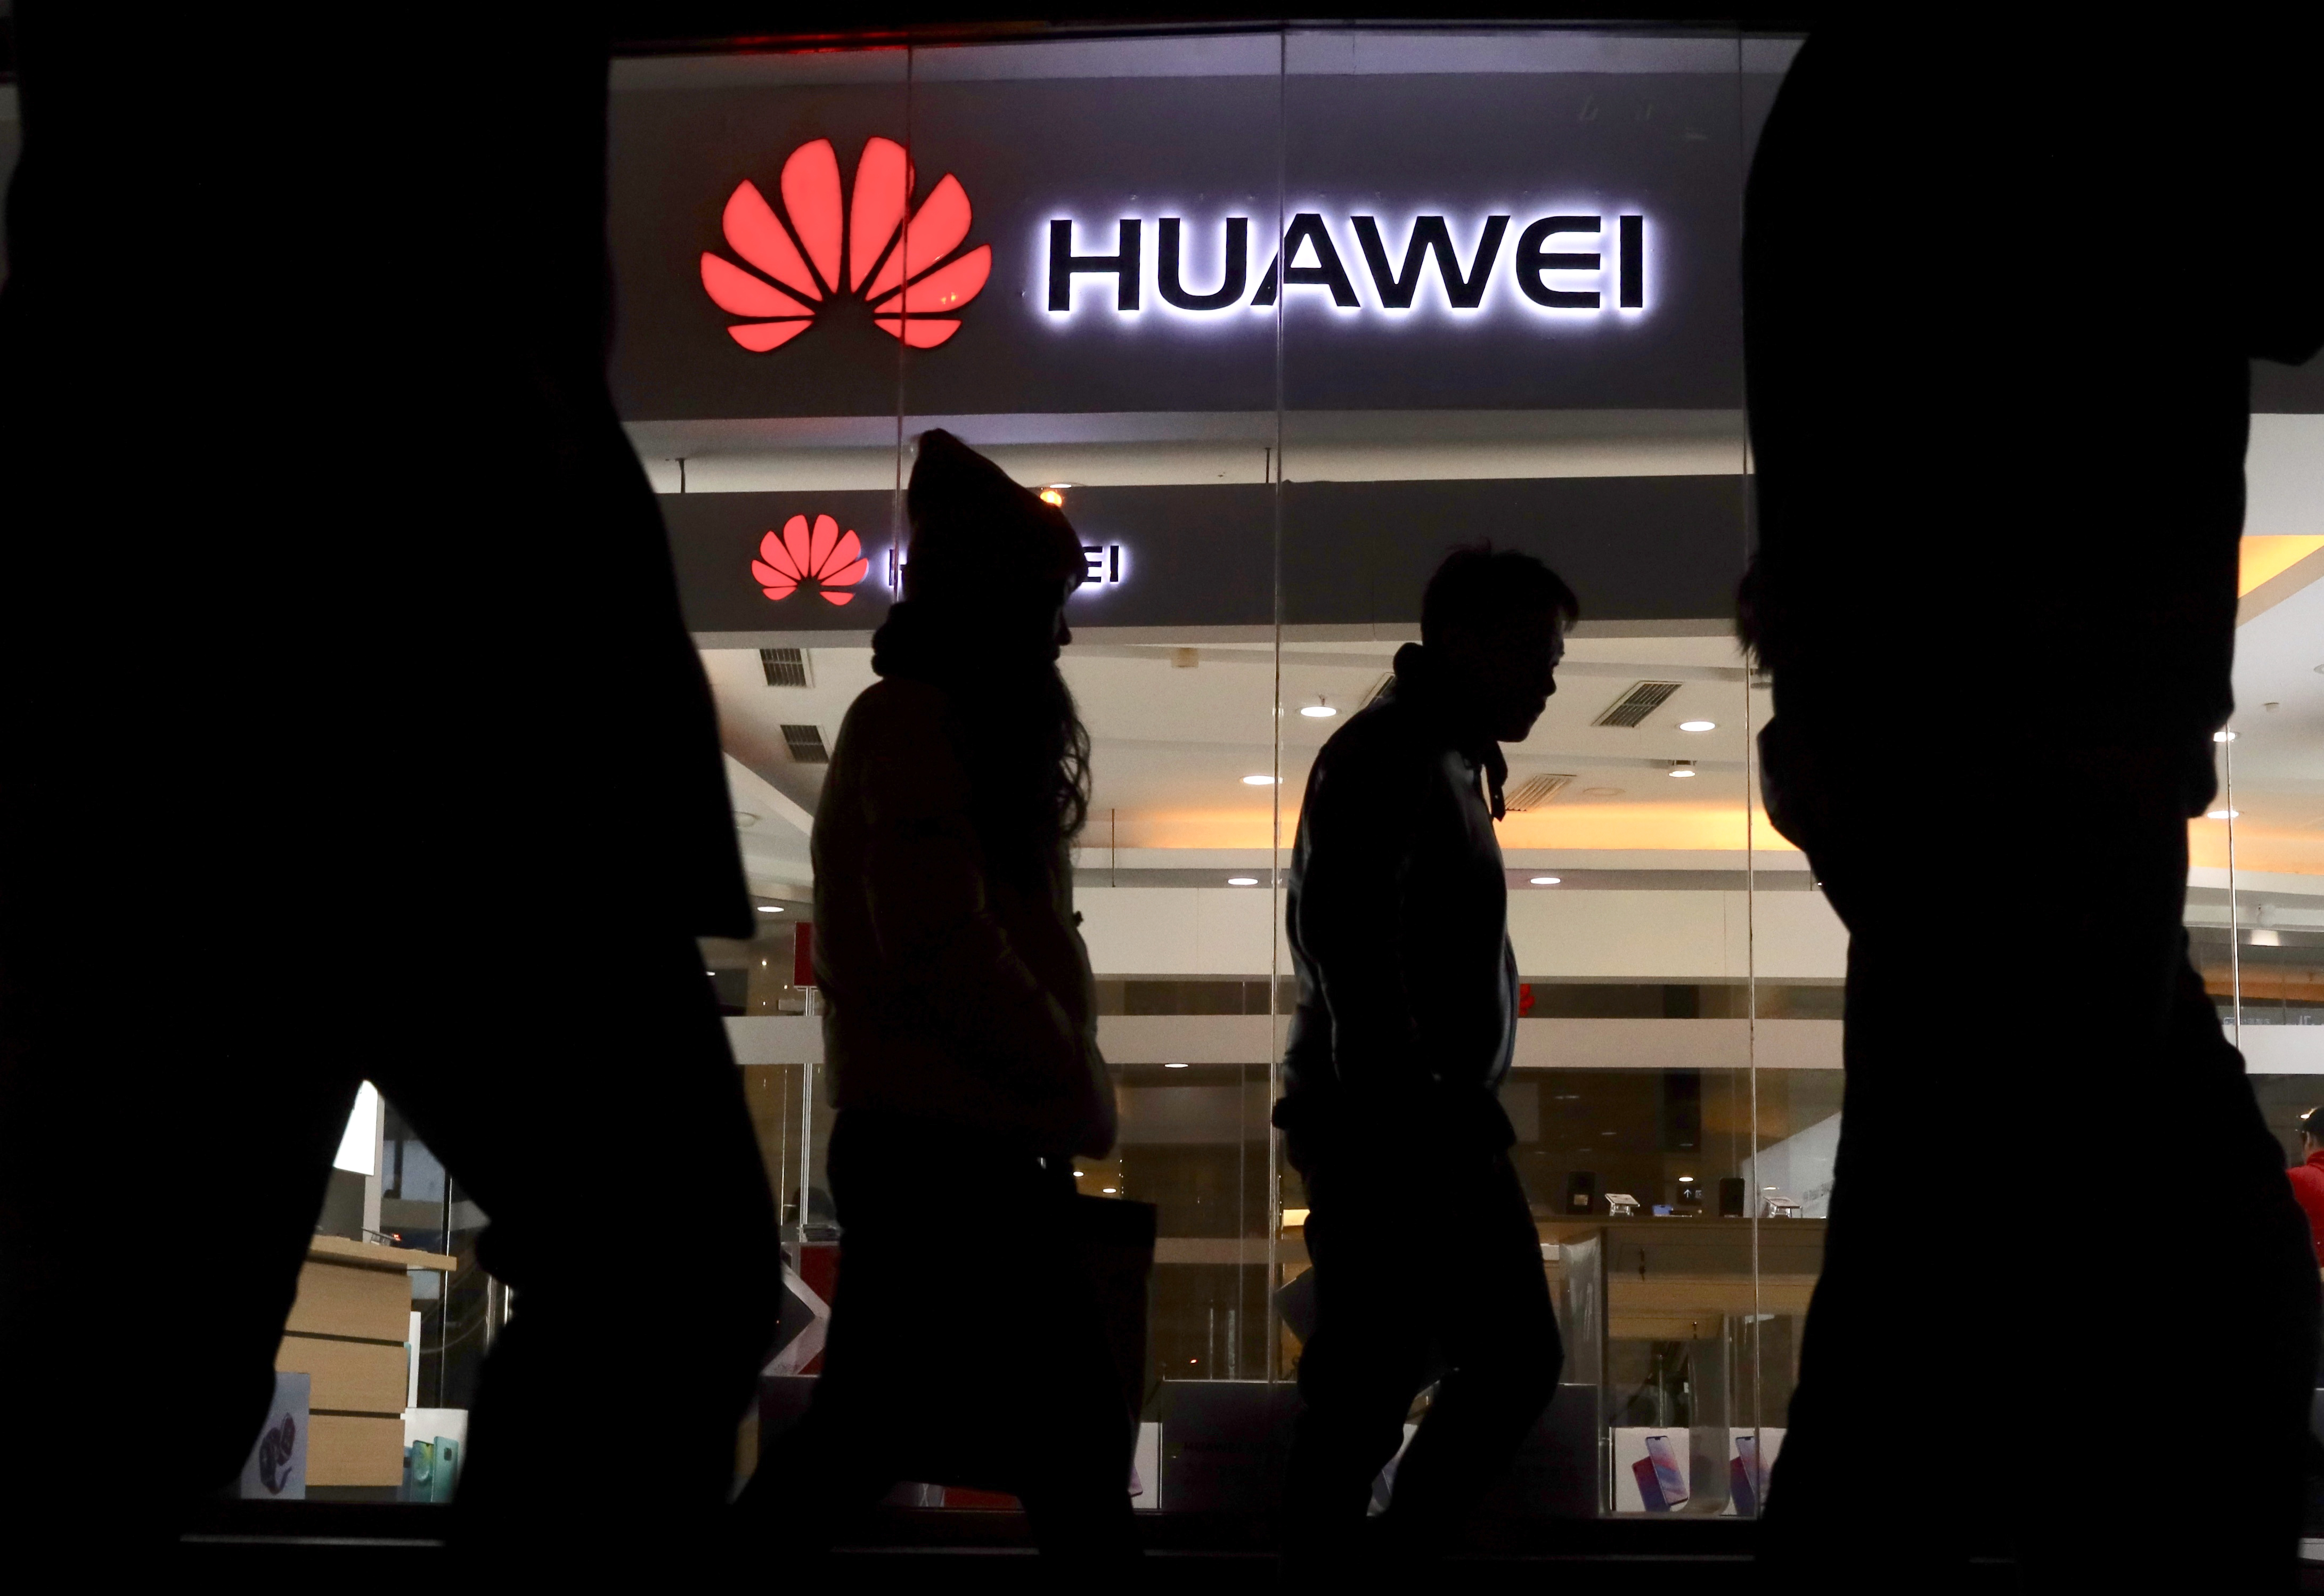 jammer nut key points - Executive’s Arrest, Security Worries Stymie Huawei’s Reach